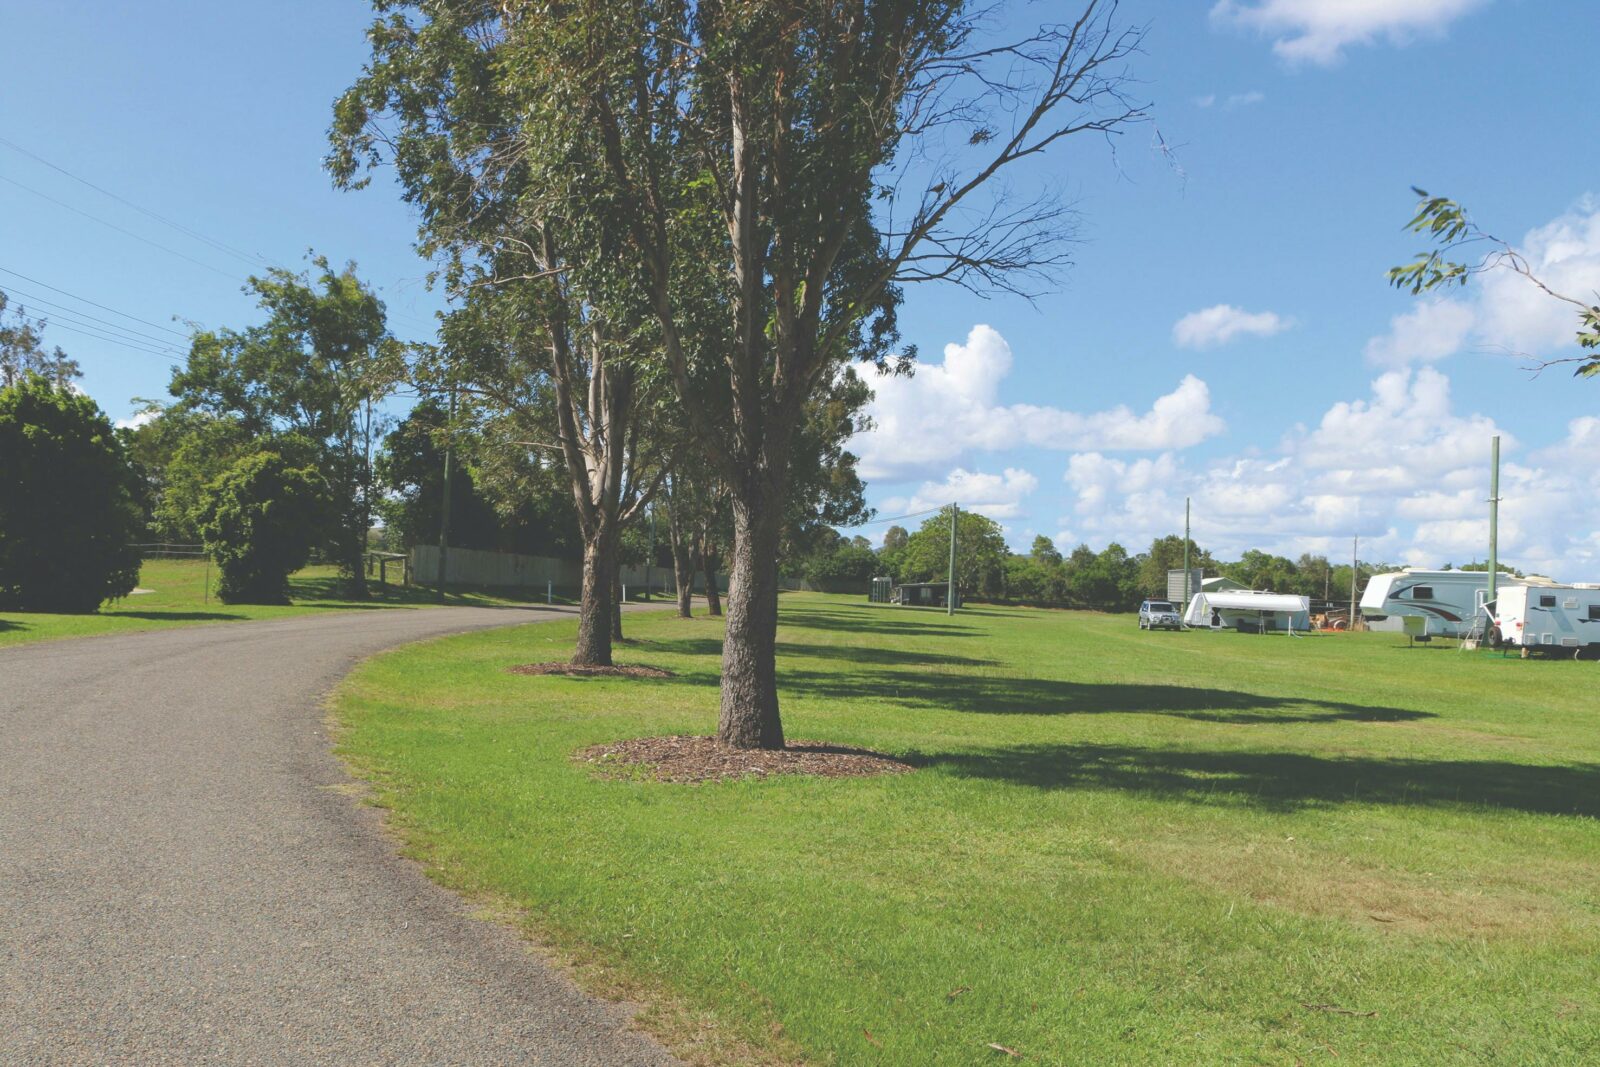 Kilcoy Showgrounds - part of the road with green grass, gumtrees and caravans in the distance.